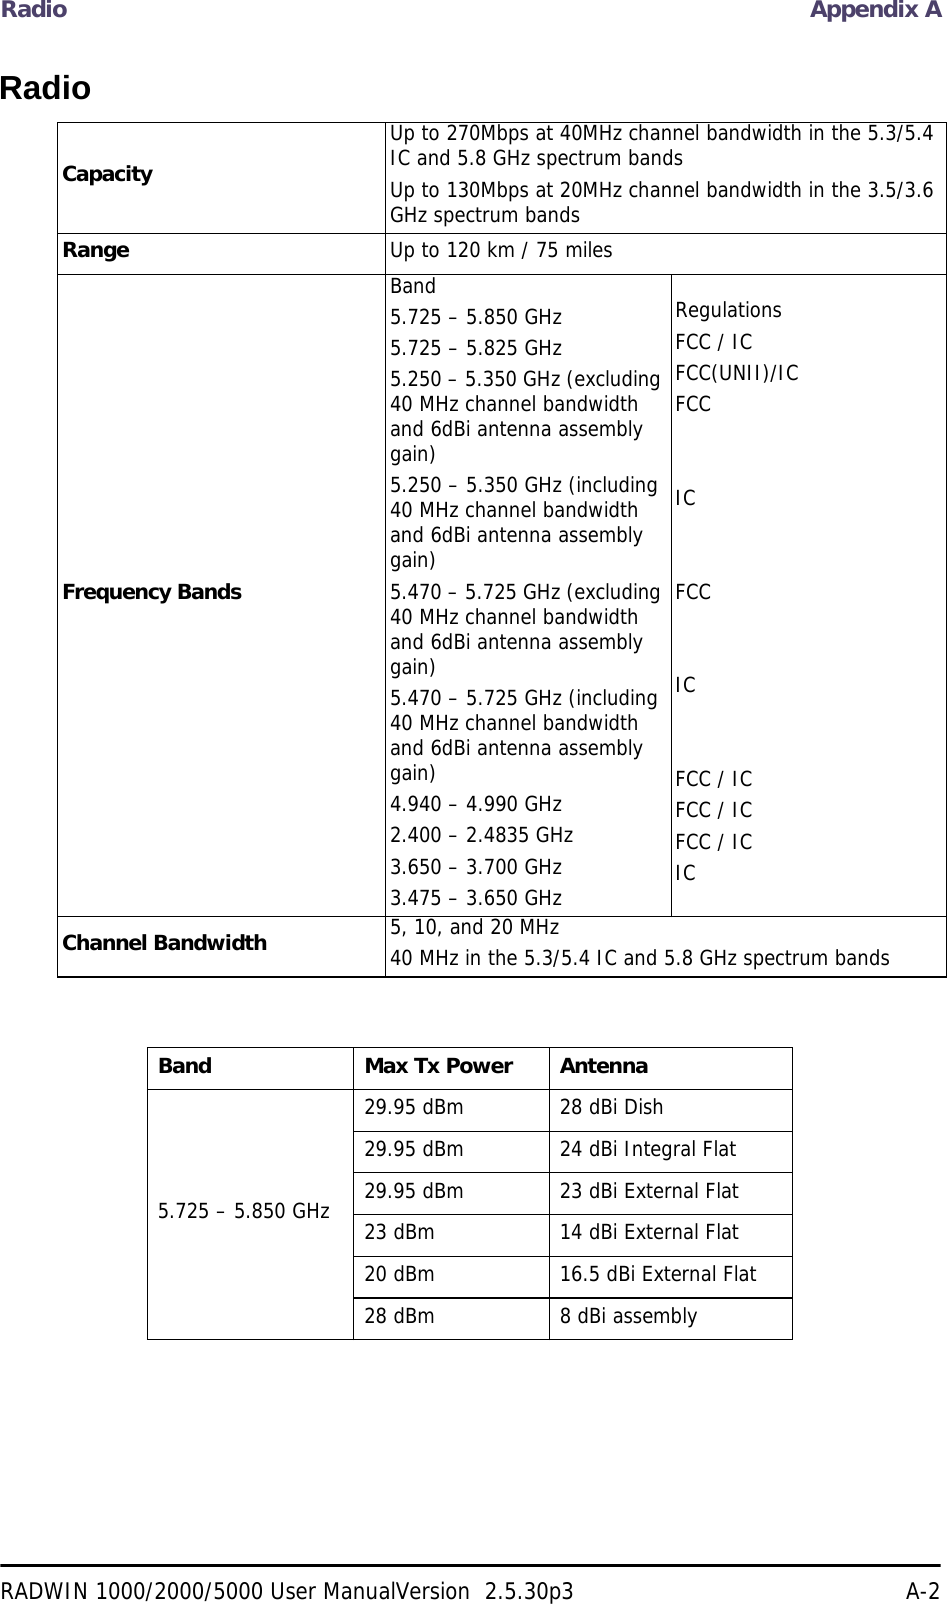 Radio Appendix ARADWIN 1000/2000/5000 User ManualVersion  2.5.30p3 A-2RadioCapacityUp to 270Mbps at 40MHz channel bandwidth in the 5.3/5.4 IC and 5.8 GHz spectrum bandsUp to 130Mbps at 20MHz channel bandwidth in the 3.5/3.6 GHz spectrum bandsRange Up to 120 km / 75 milesFrequency BandsBand5.725 – 5.850 GHz5.725 – 5.825 GHz 5.250 – 5.350 GHz (excluding 40 MHz channel bandwidth and 6dBi antenna assembly gain)5.250 – 5.350 GHz (including 40 MHz channel bandwidth and 6dBi antenna assembly gain)5.470 – 5.725 GHz (excluding 40 MHz channel bandwidth and 6dBi antenna assembly gain)5.470 – 5.725 GHz (including 40 MHz channel bandwidth and 6dBi antenna assembly gain)4.940 – 4.990 GHz 2.400 – 2.4835 GHz3.650 – 3.700 GHz3.475 – 3.650 GHzRegulationsFCC / ICFCC(UNII)/ICFCCICFCCICFCC / ICFCC / ICFCC / ICICChannel Bandwidth 5, 10, and 20 MHz40 MHz in the 5.3/5.4 IC and 5.8 GHz spectrum bandsBand Max Tx Power Antenna5.725 – 5.850 GHz29.95 dBm  28 dBi Dish29.95 dBm 24 dBi Integral Flat29.95 dBm 23 dBi External Flat23 dBm 14 dBi External Flat20 dBm 16.5 dBi External Flat28 dBm 8 dBi assembly